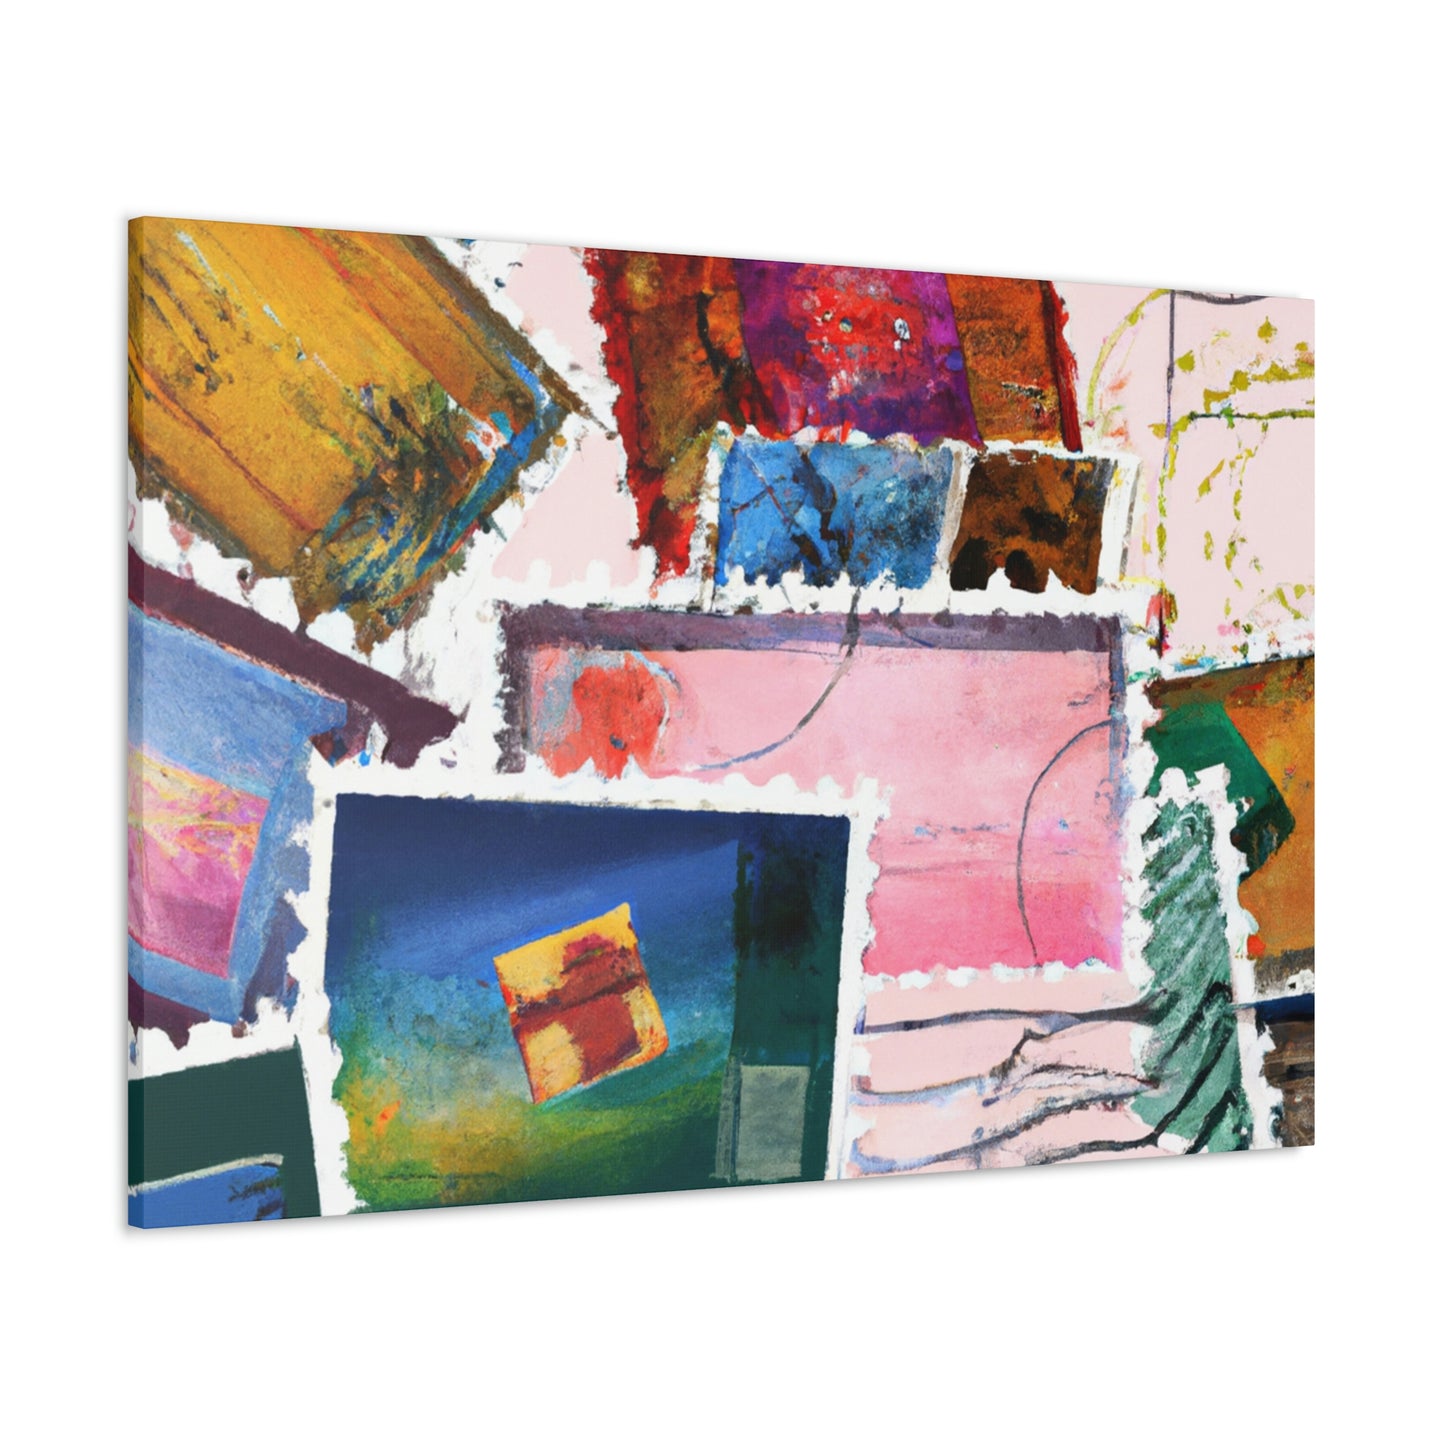 .

Global Commemorative Stamps - Postage Stamp Collector Canvas Wall Art